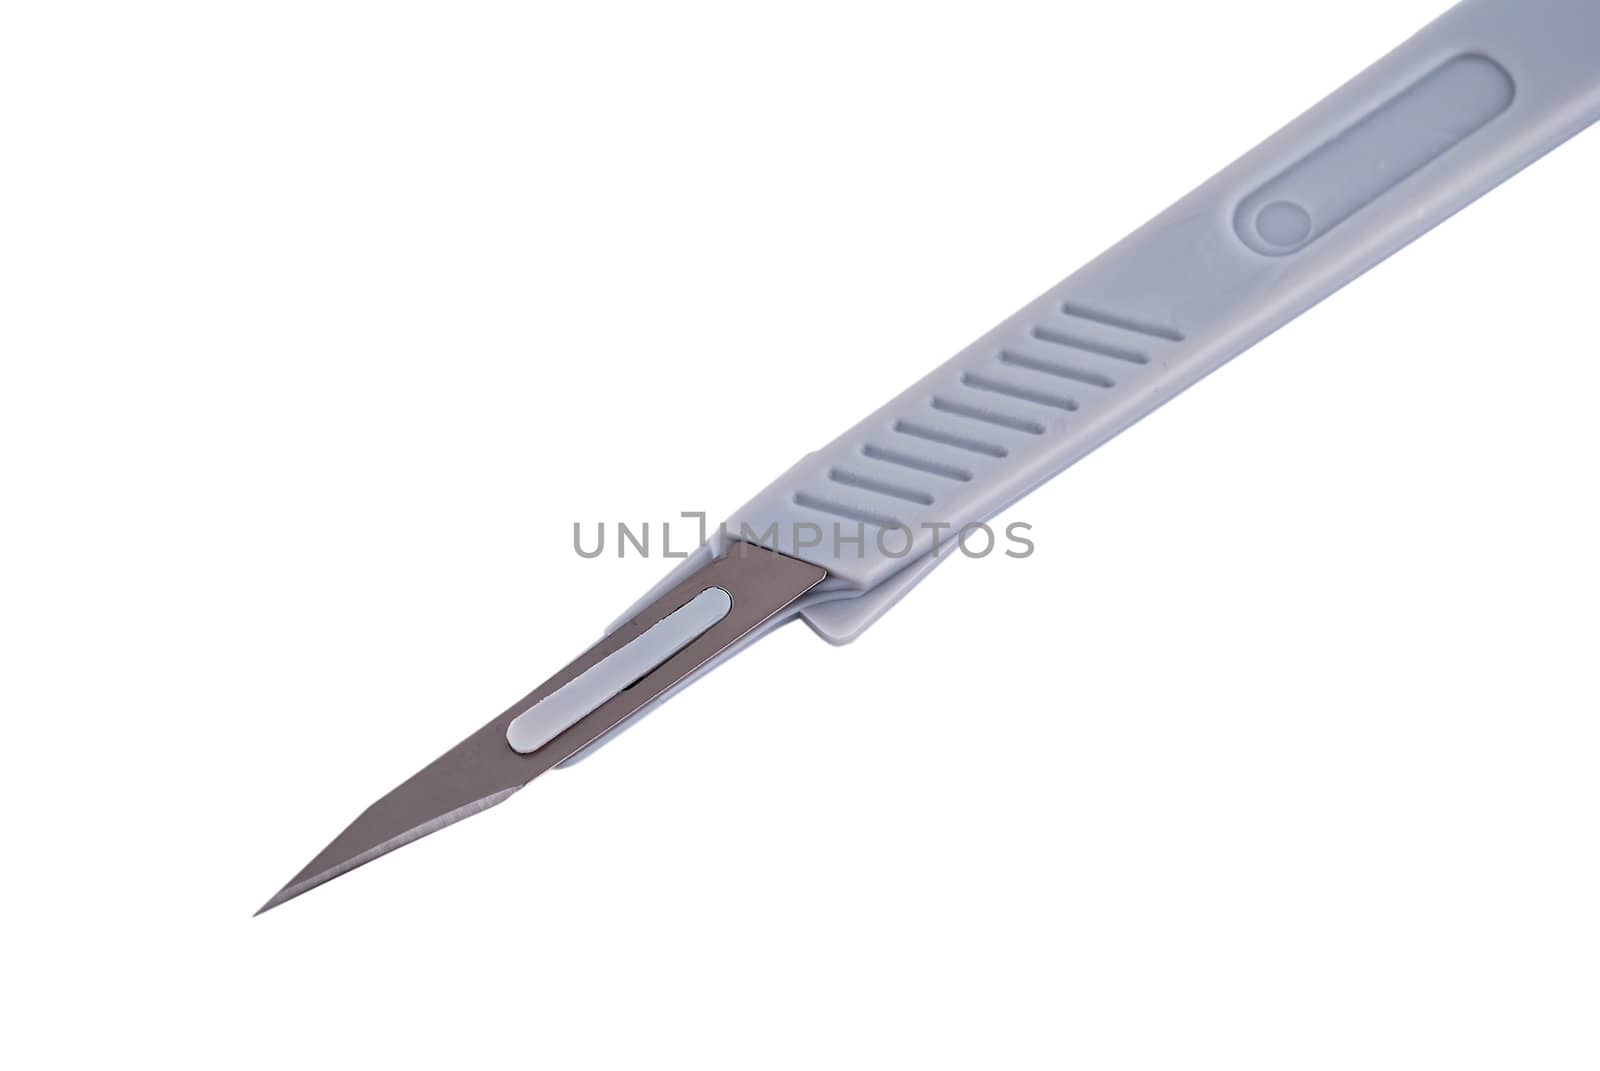 Disposable surgical scalpel on a white background